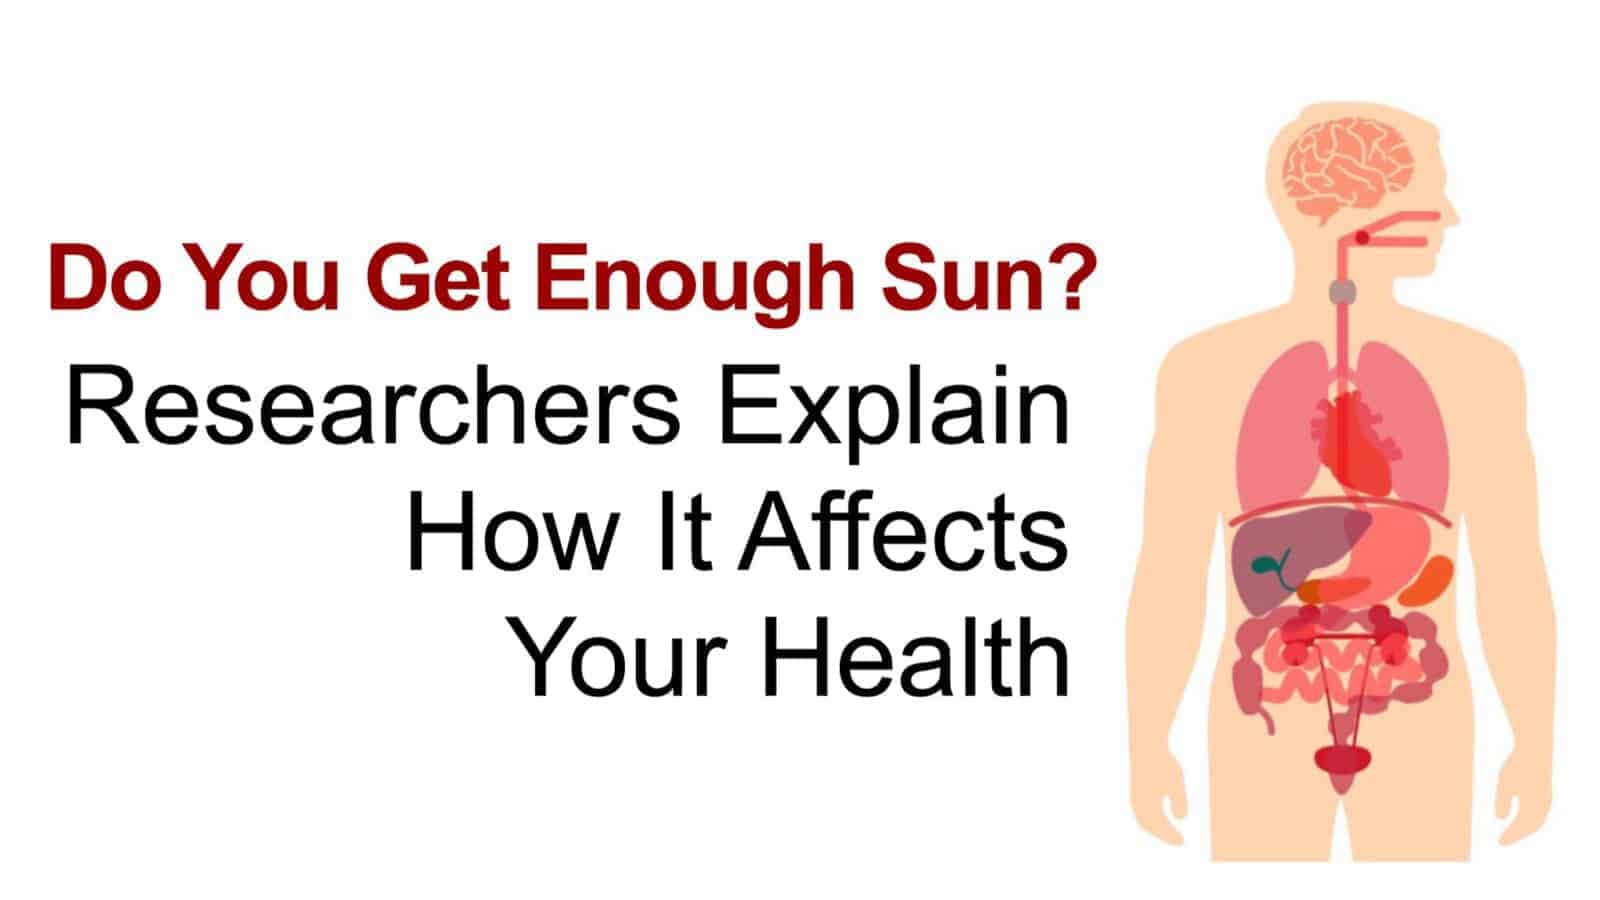 Do You Get Enough Sun? Researchers Explain How It Affects Your Health